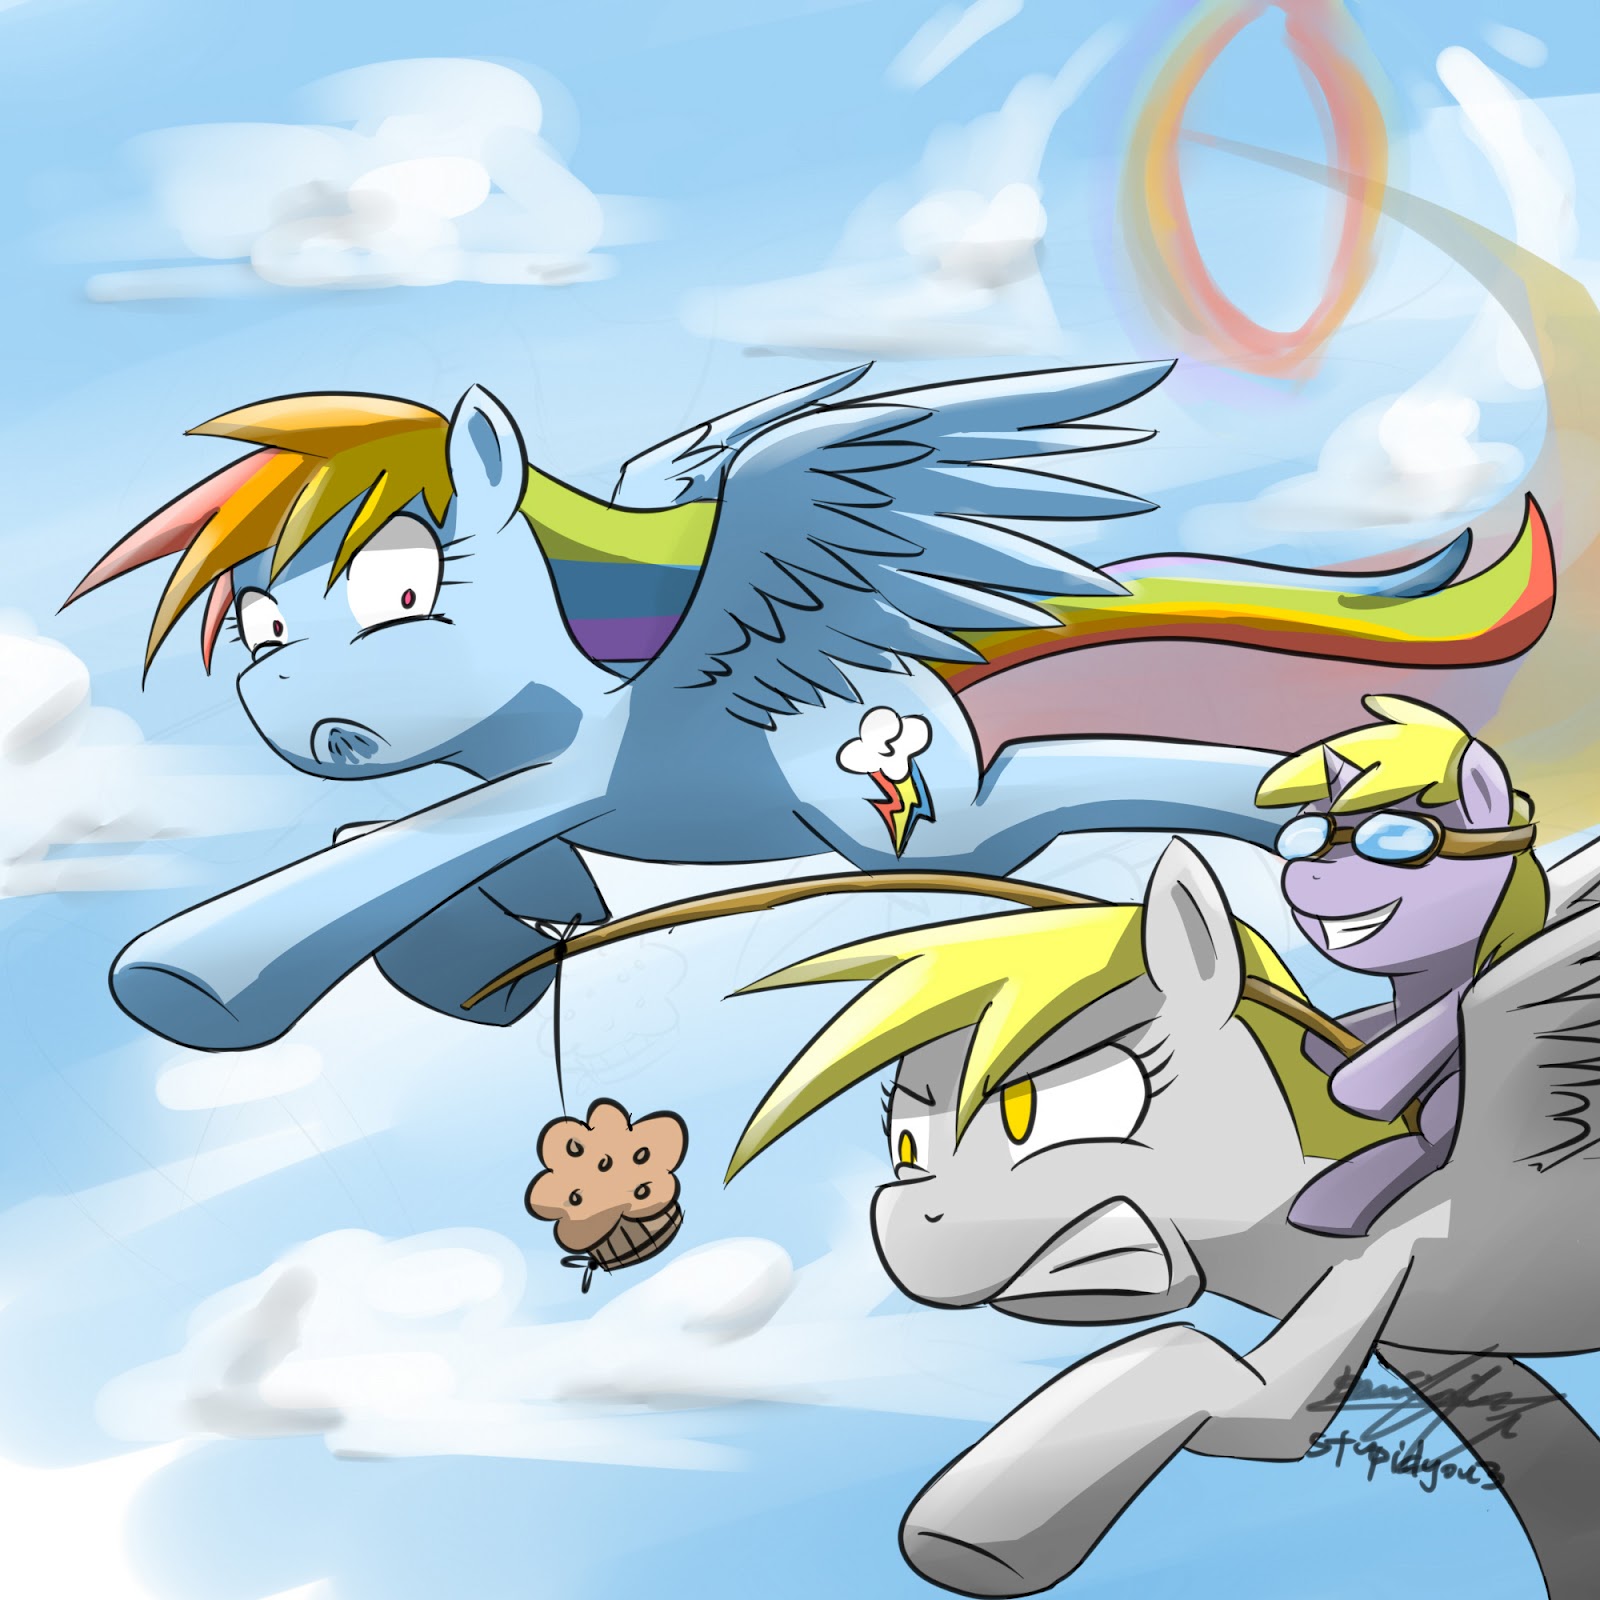 Funny pictures, videos and other media thread! - Page 11 142127+-+artist+stupidyou3+derpy_hooves+dinky_hooves+muffin+rainbow_dash